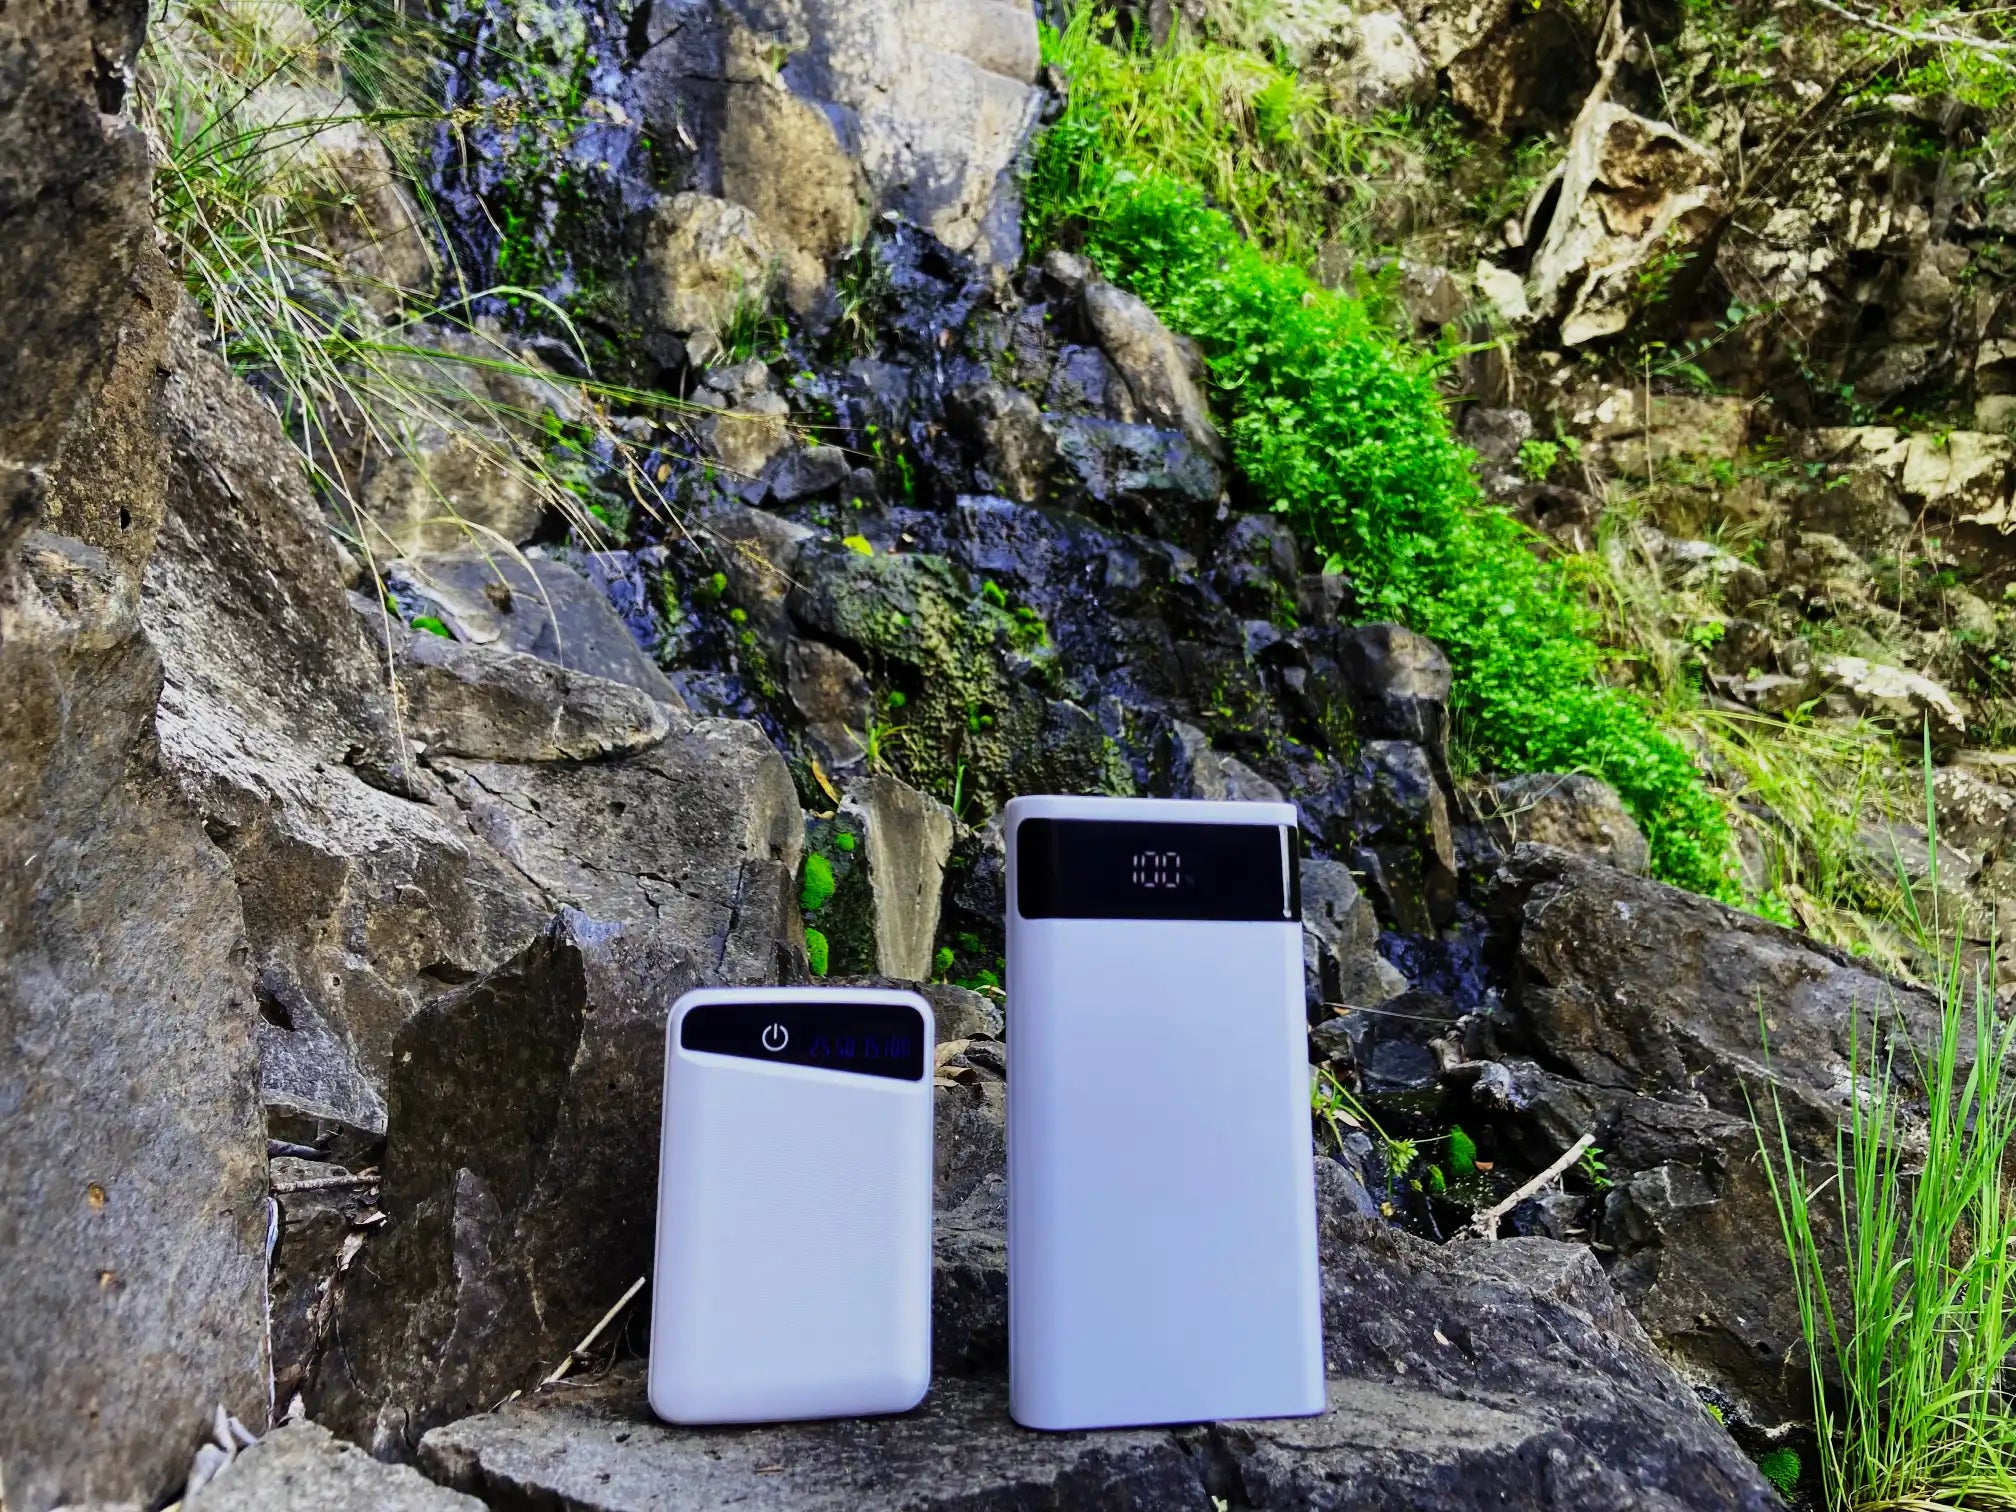 fast charging portable powerbanks made in australia using 100% sustainability sourced lithium-ion batteries 